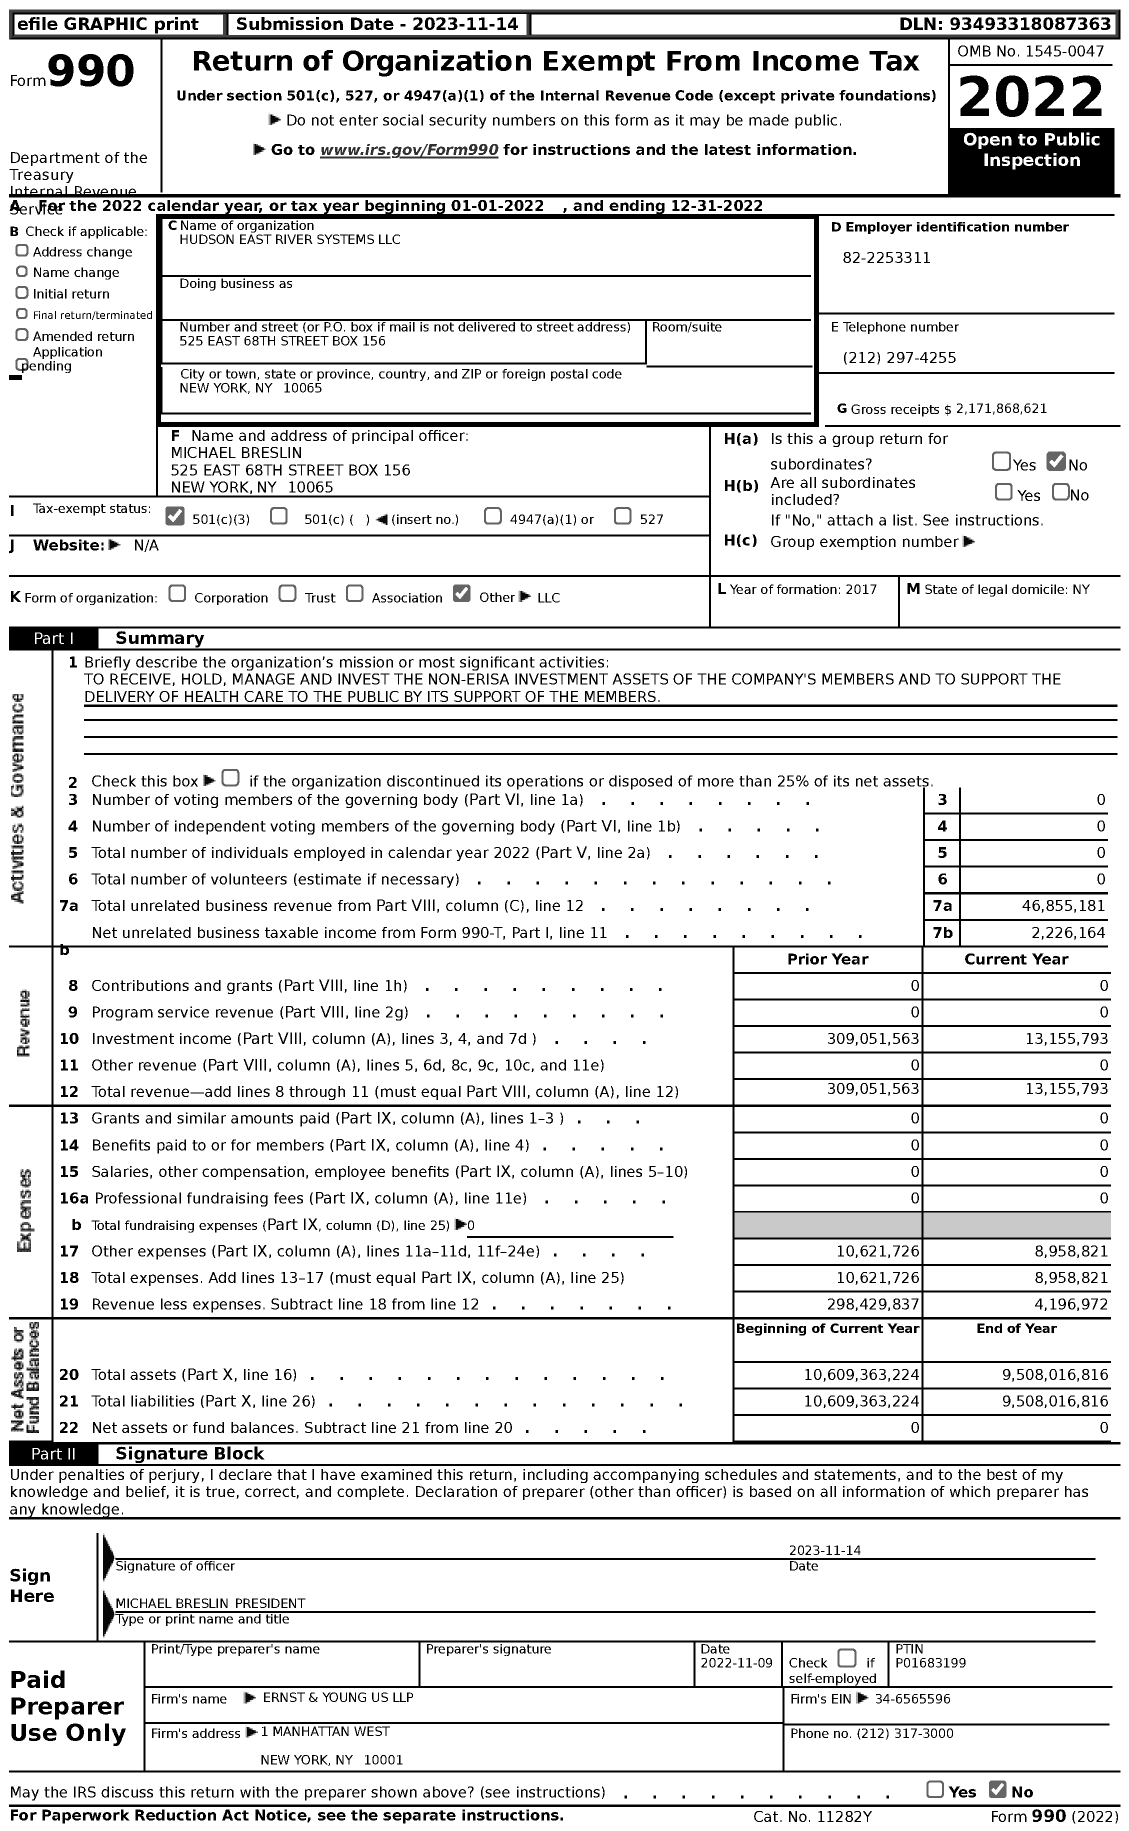 Image of first page of 2022 Form 990 for Hudson East River Systems LLC